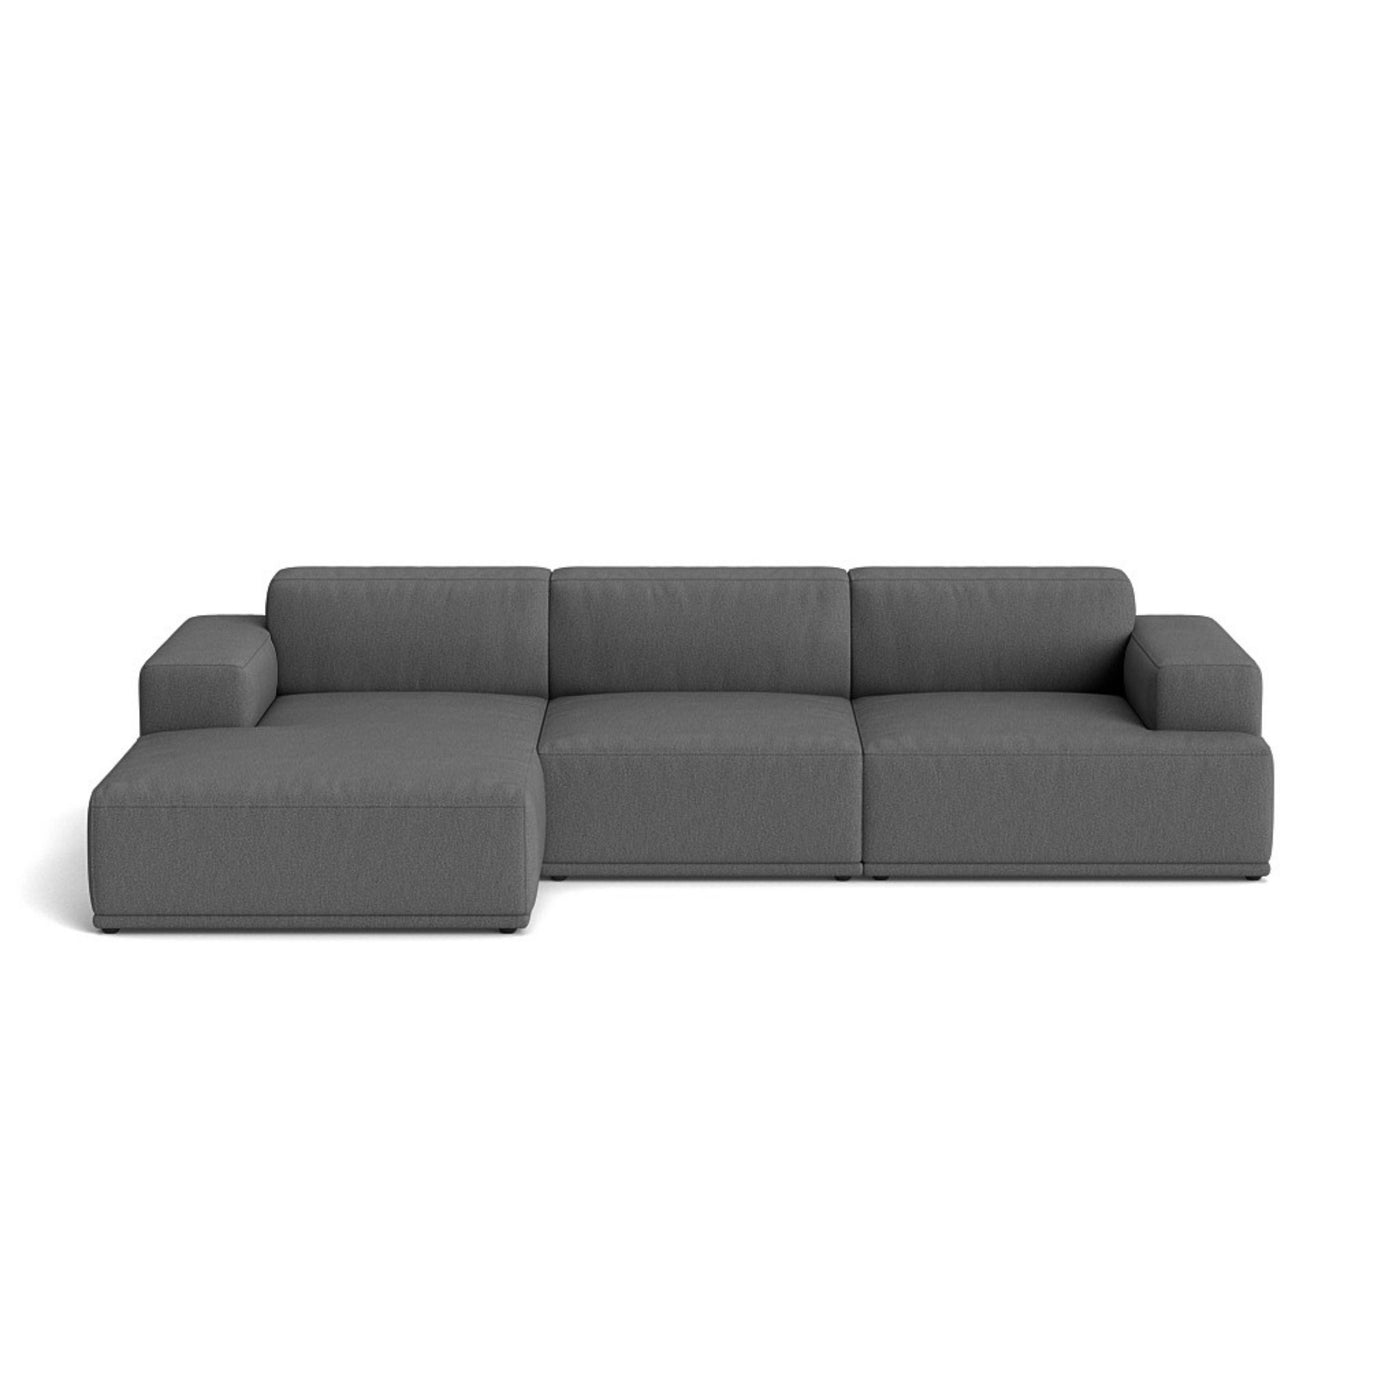 Muuto Connect Soft Modular 3 Seater Sofa, configuration 2. Made-to-order from someday designs. #colour_clay-13